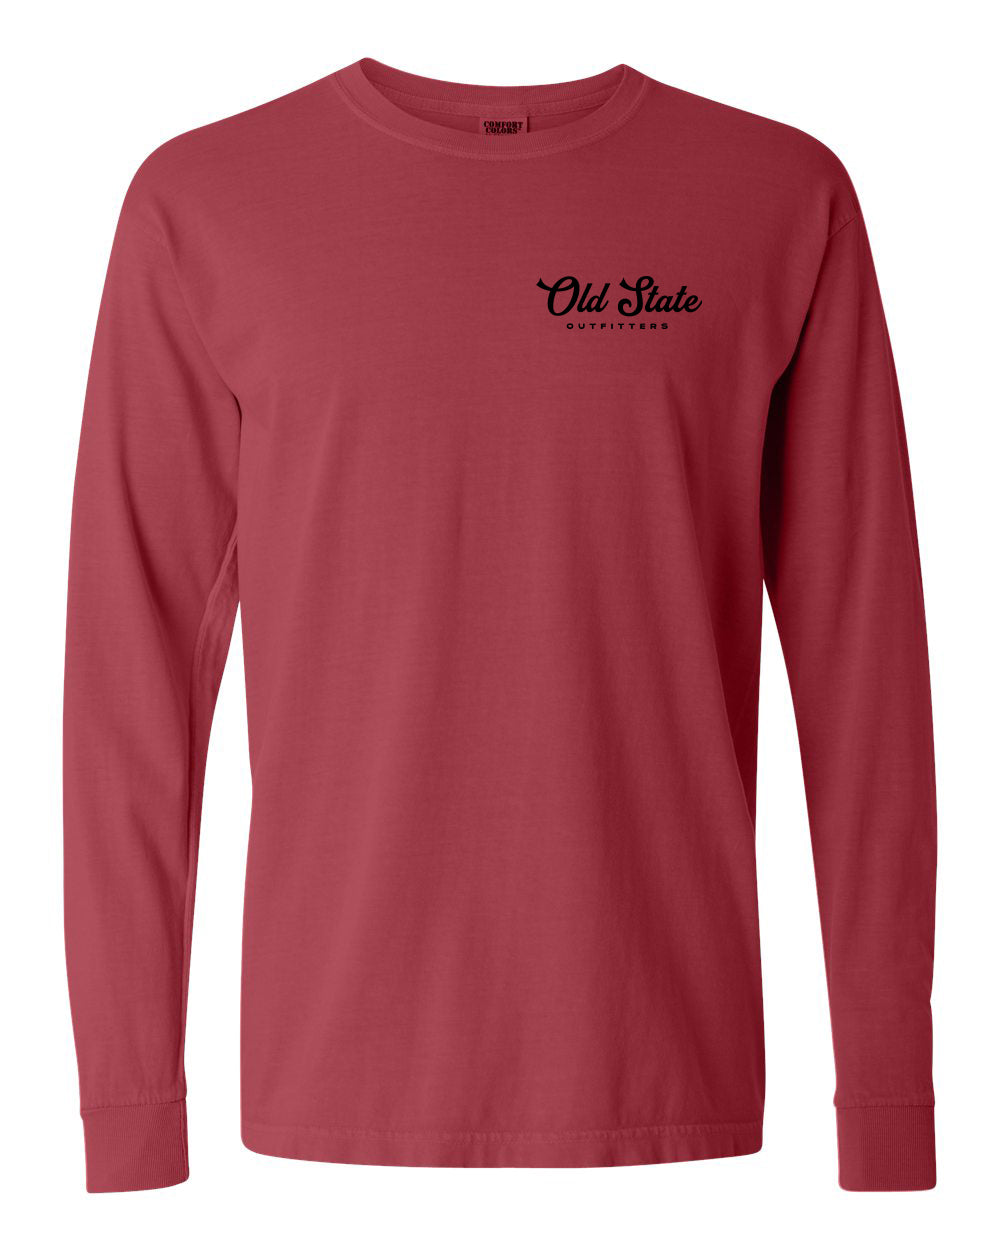 Old State Outfitters Topo Long Sleeve Shirt